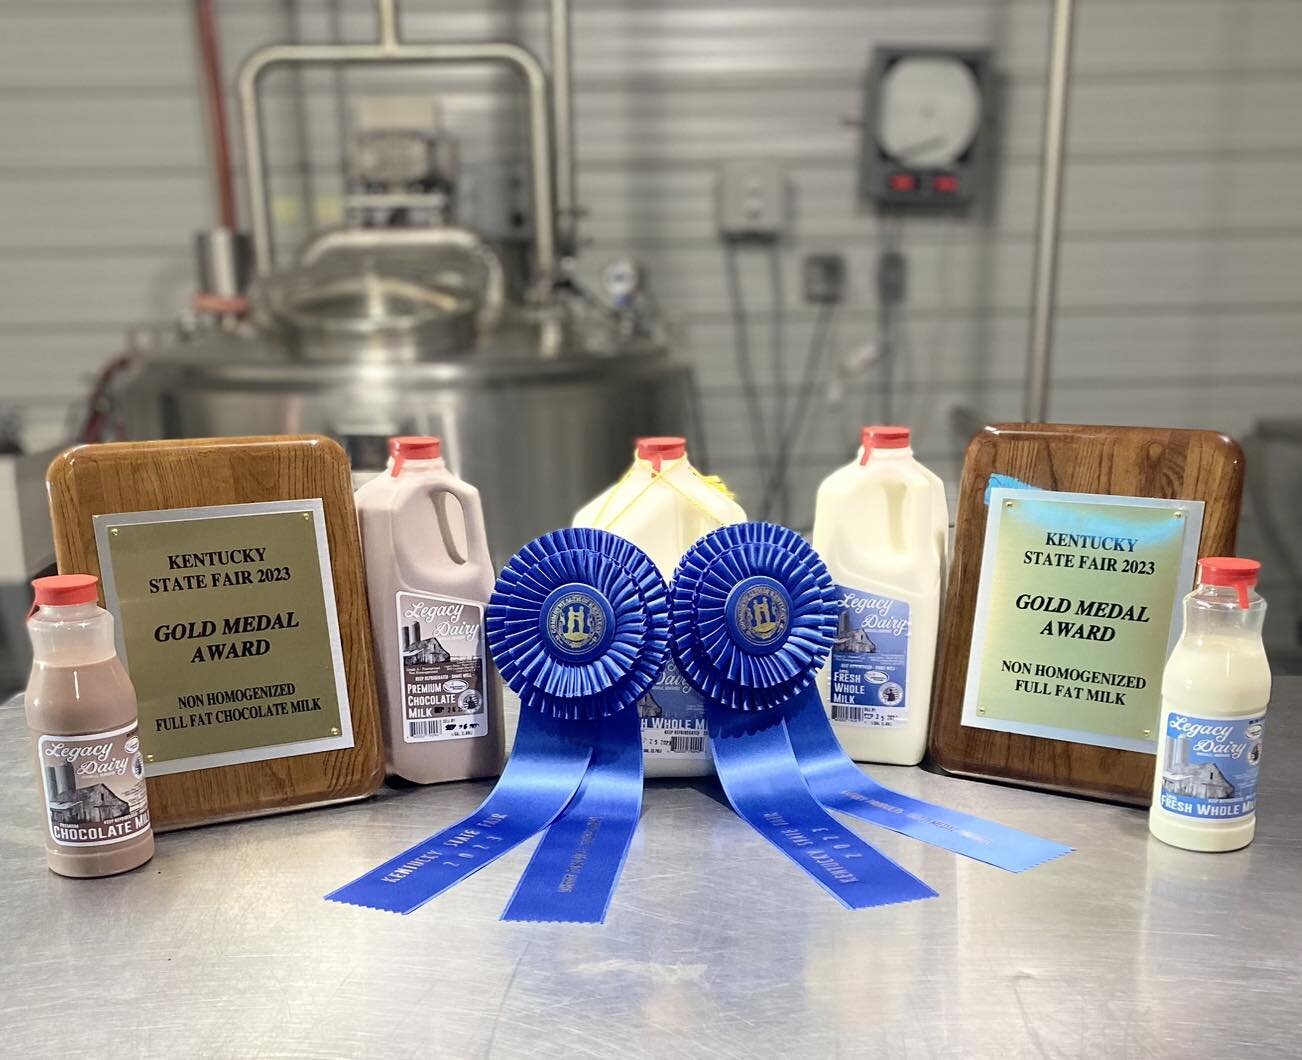 We have always said the cream always rises to the top. And the 2023 Kentucky State Fair concluded just that way. We are so excited to announce that Legacy Dairy has brought home the gold medal award and blue rosette for the second year in a row for b